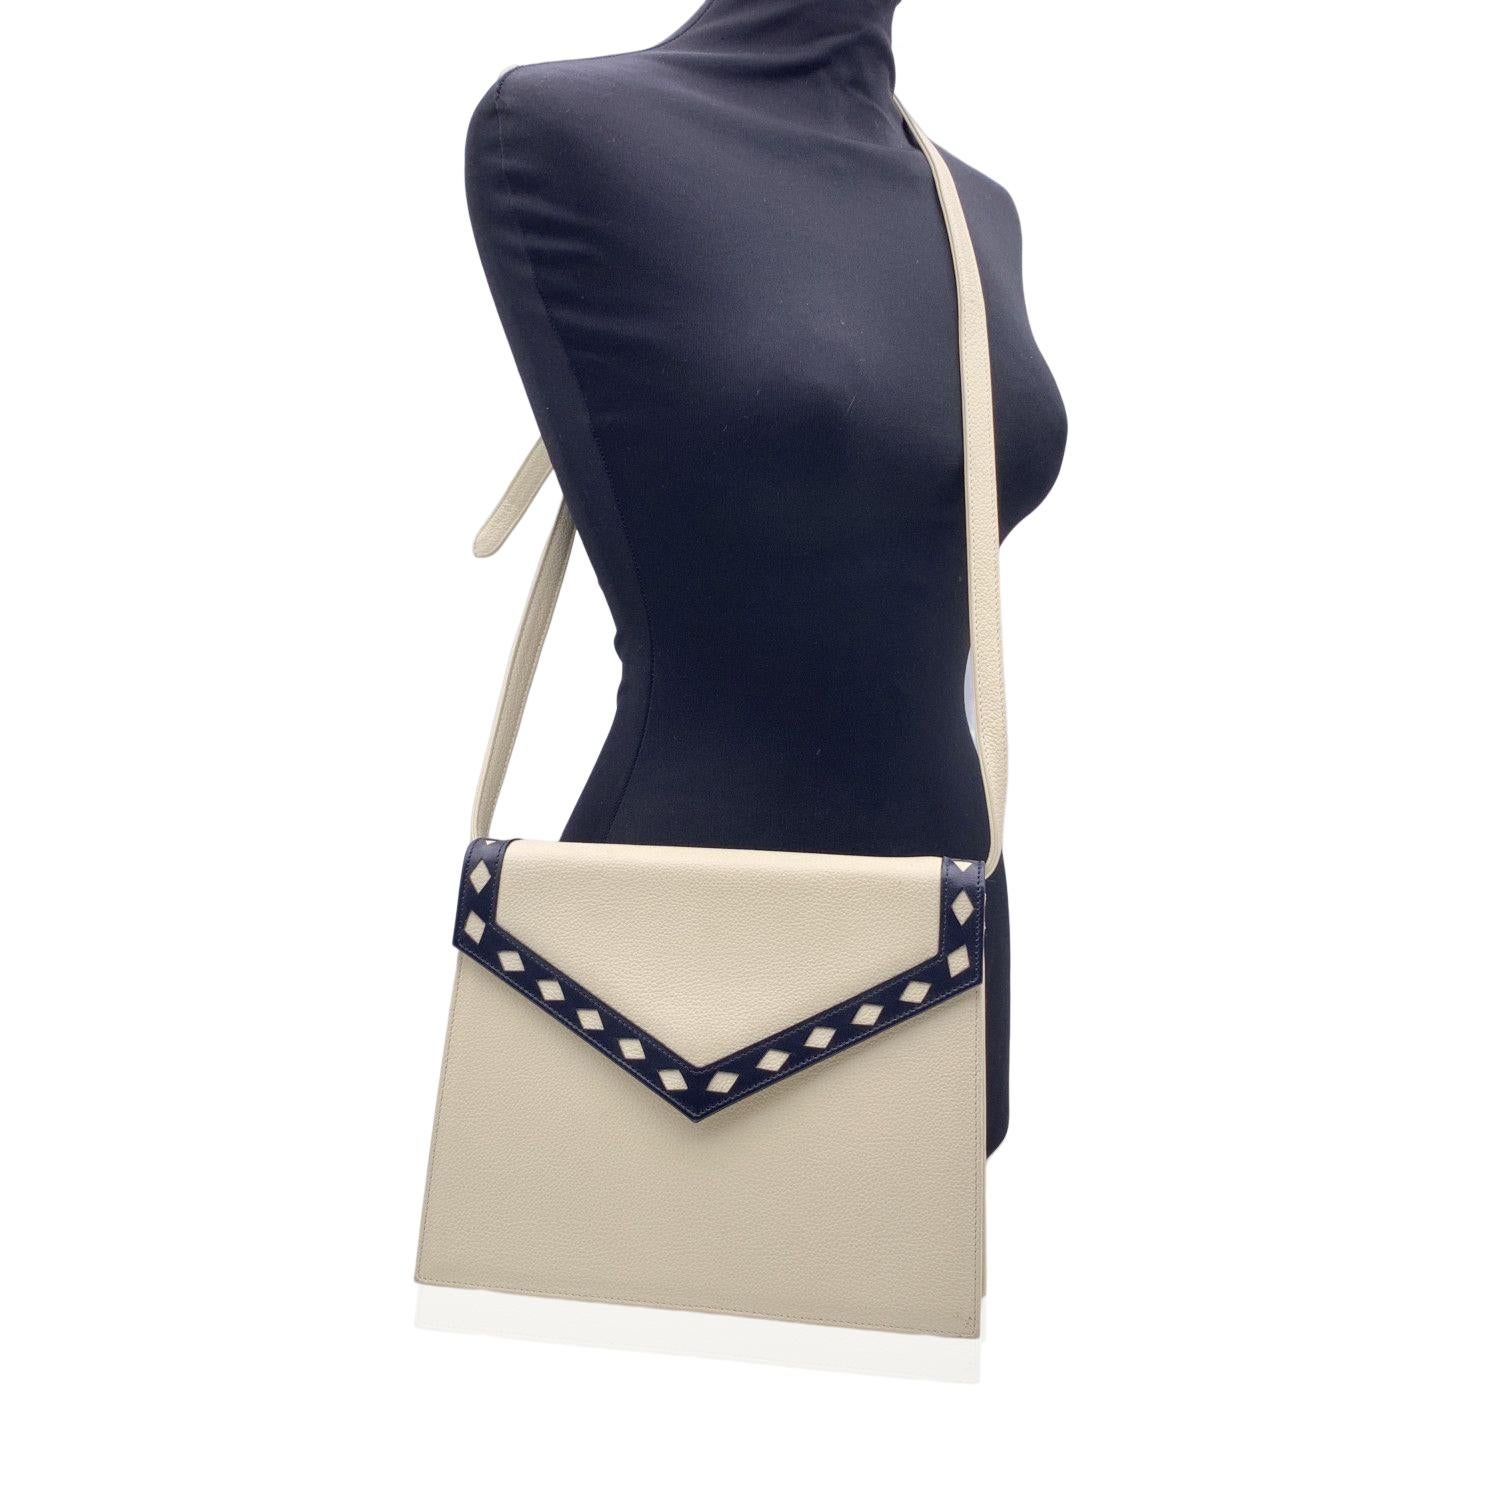 Vintage Yves Saint Laurent shoulder bag in white leather with navy blue leather trim. Flap with magnetic button closure. Adjustable and removable shoulder strap; convertible model, you can use it as a shoulder bag or you can use it as a clutch purse